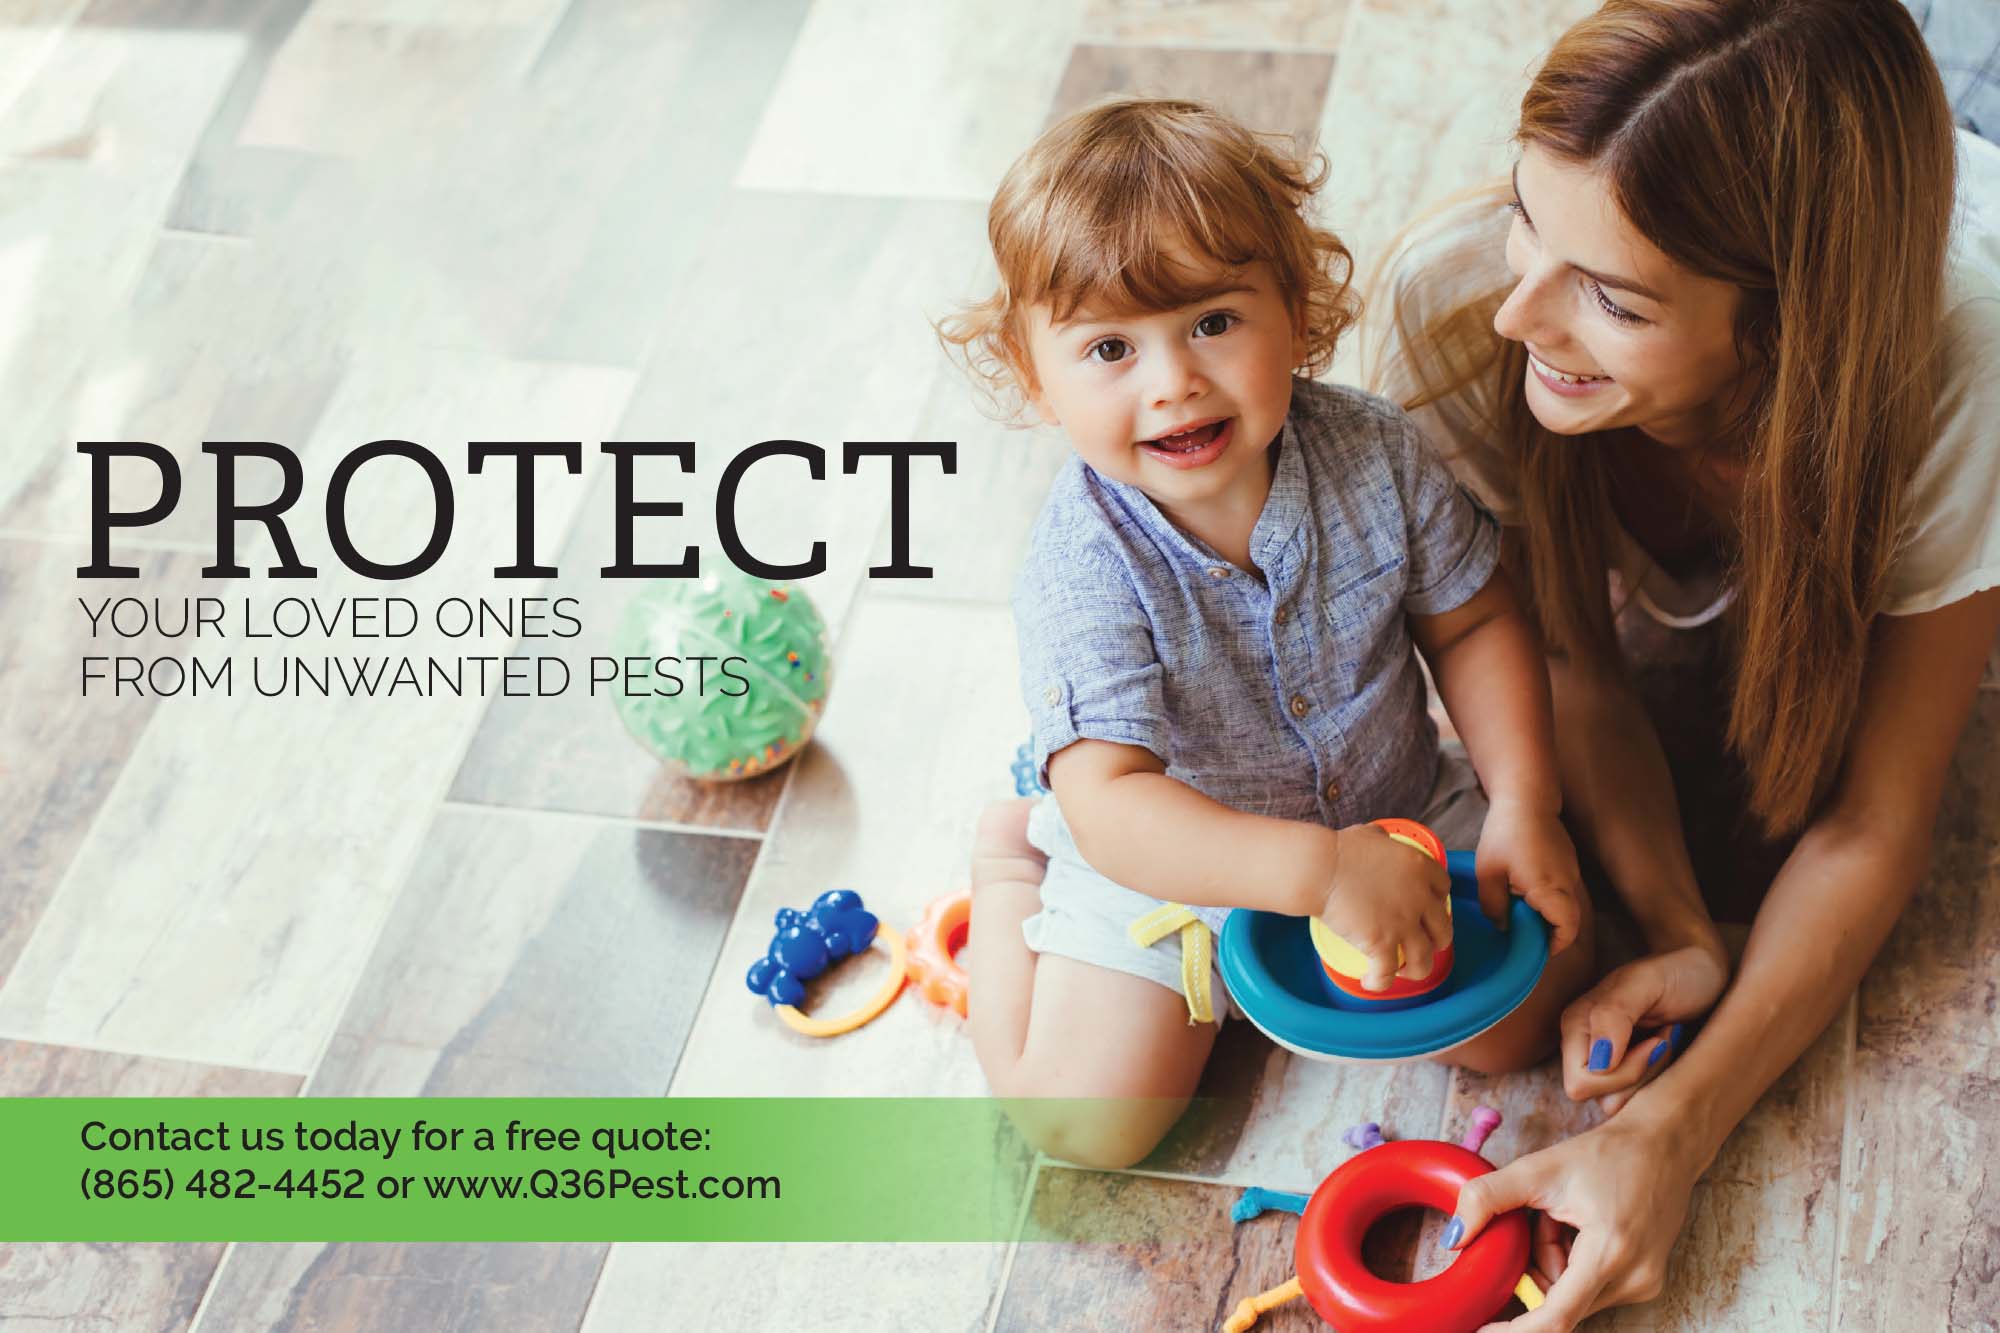 Protect Your Loved Ones from Unwanted Pests